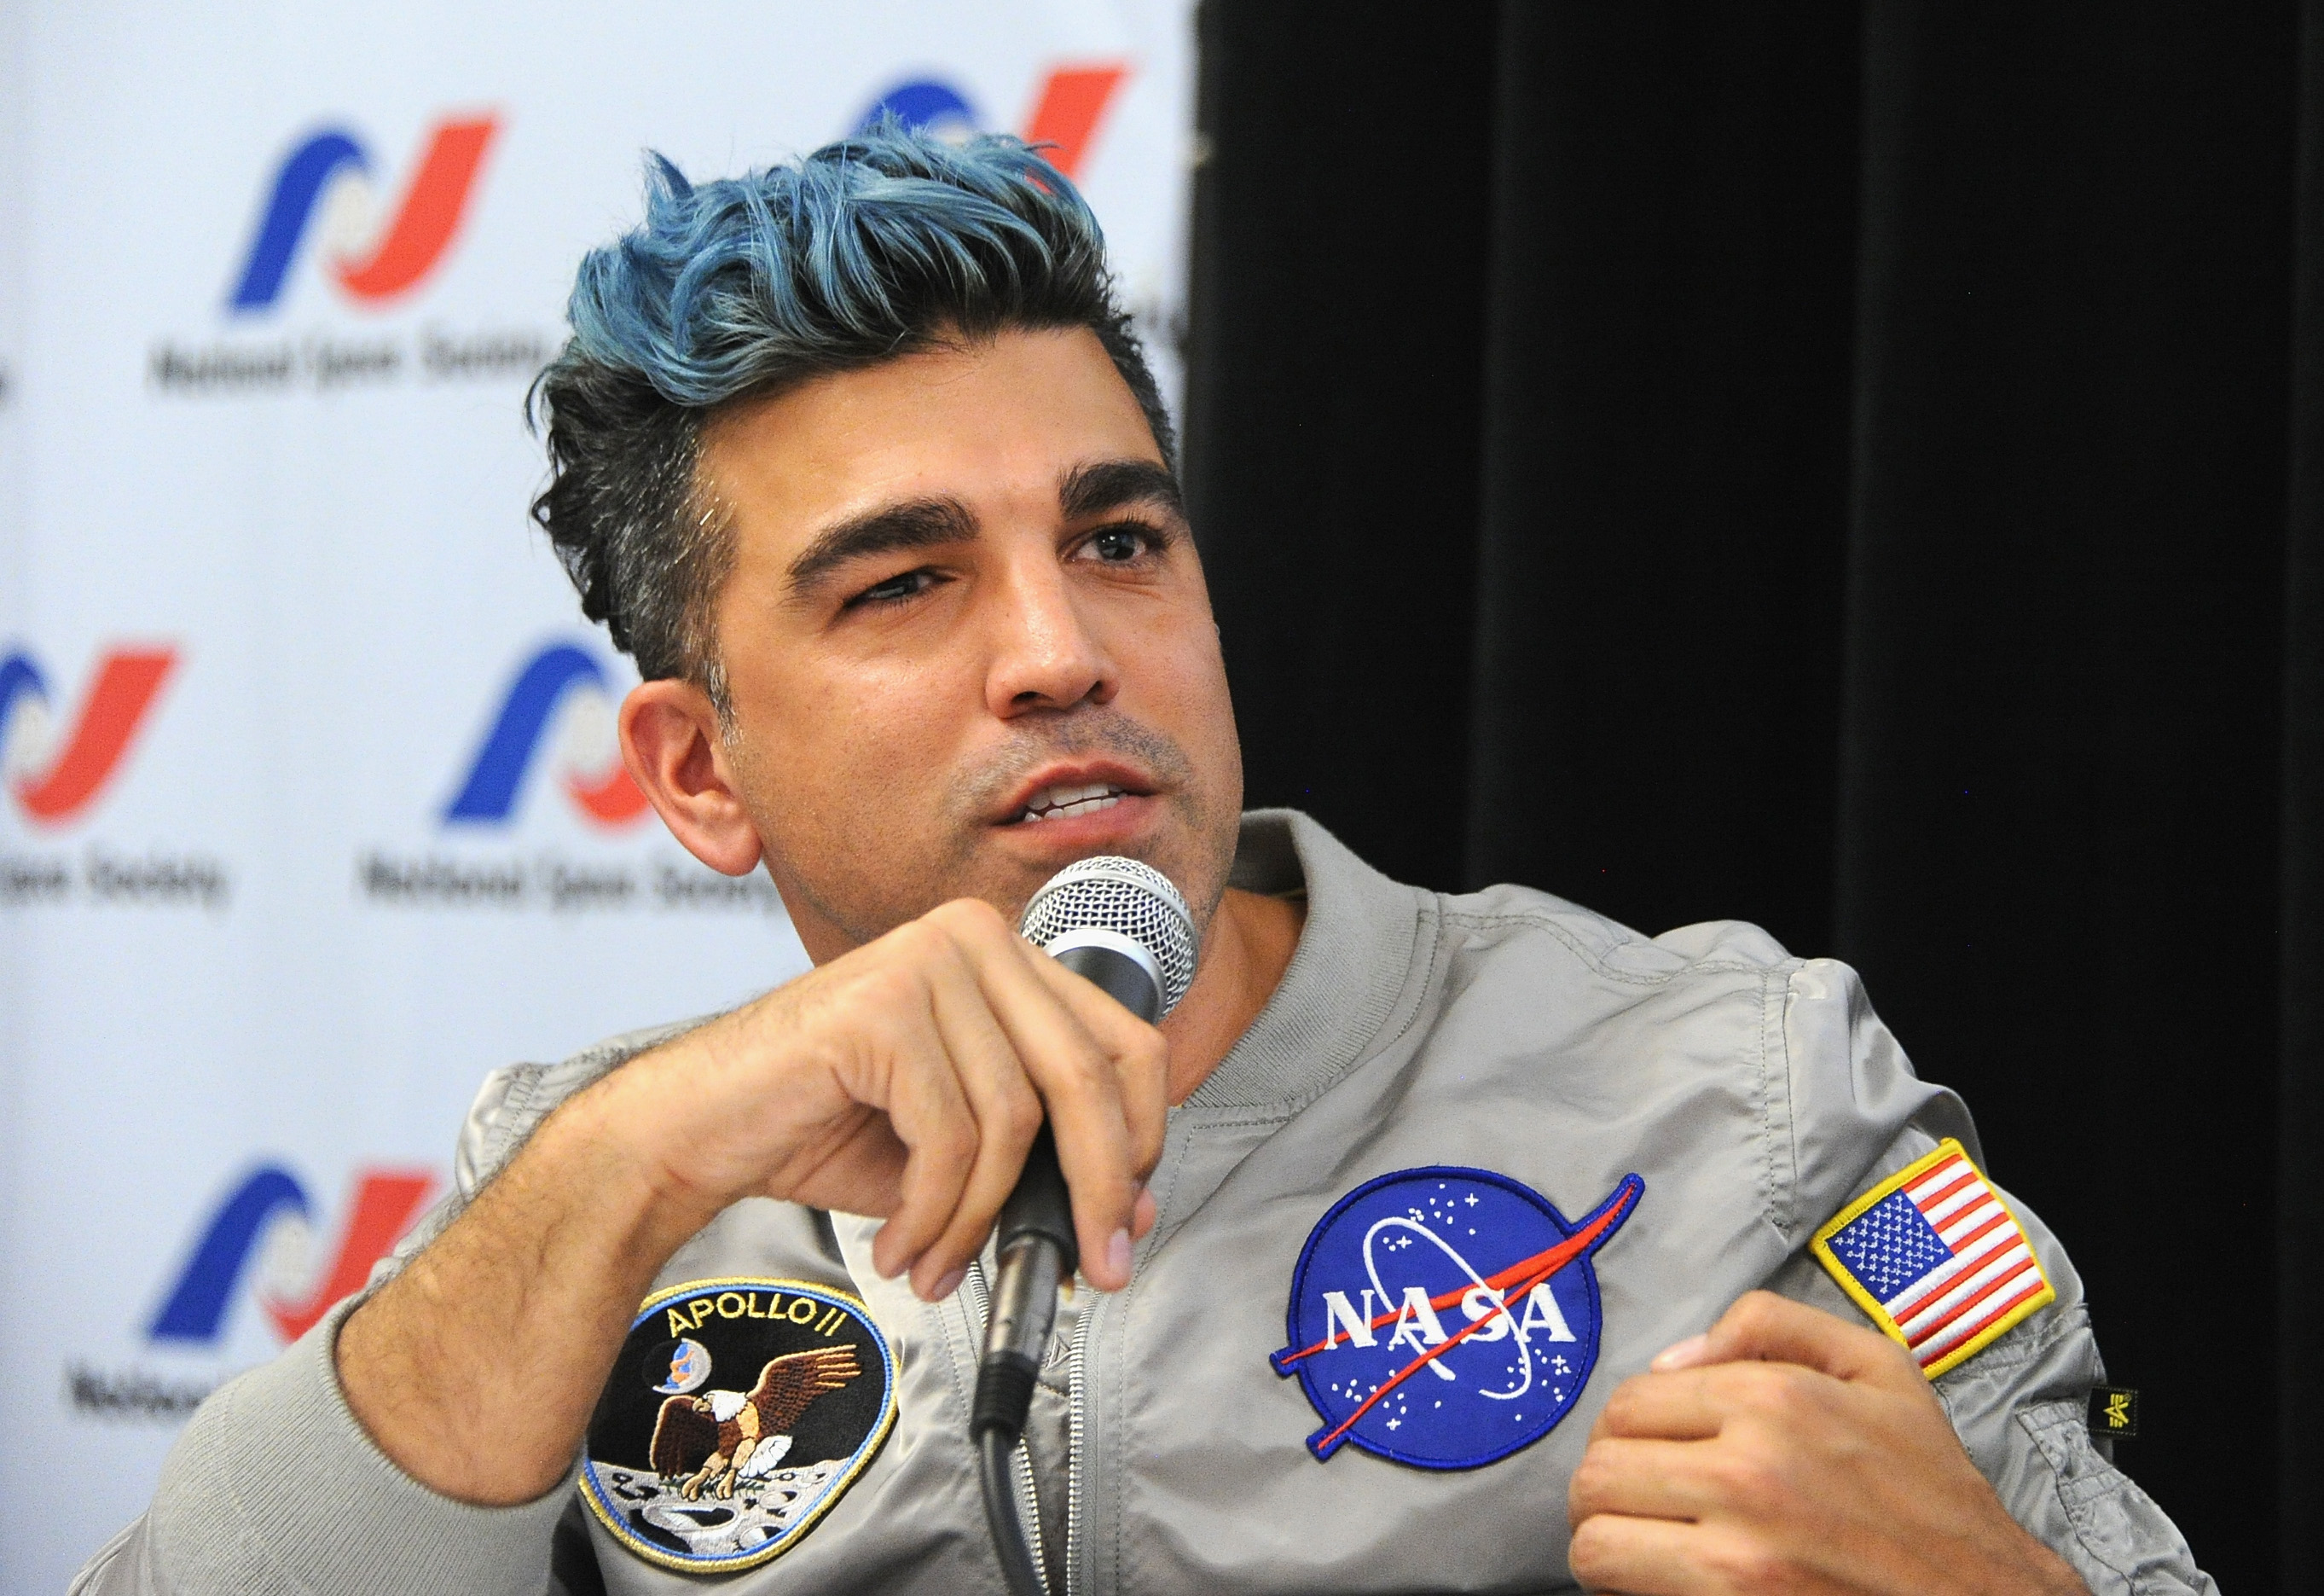 a man with a mohawk in a nasa t-shirt speaks into a microphone while seated at a table on a stage